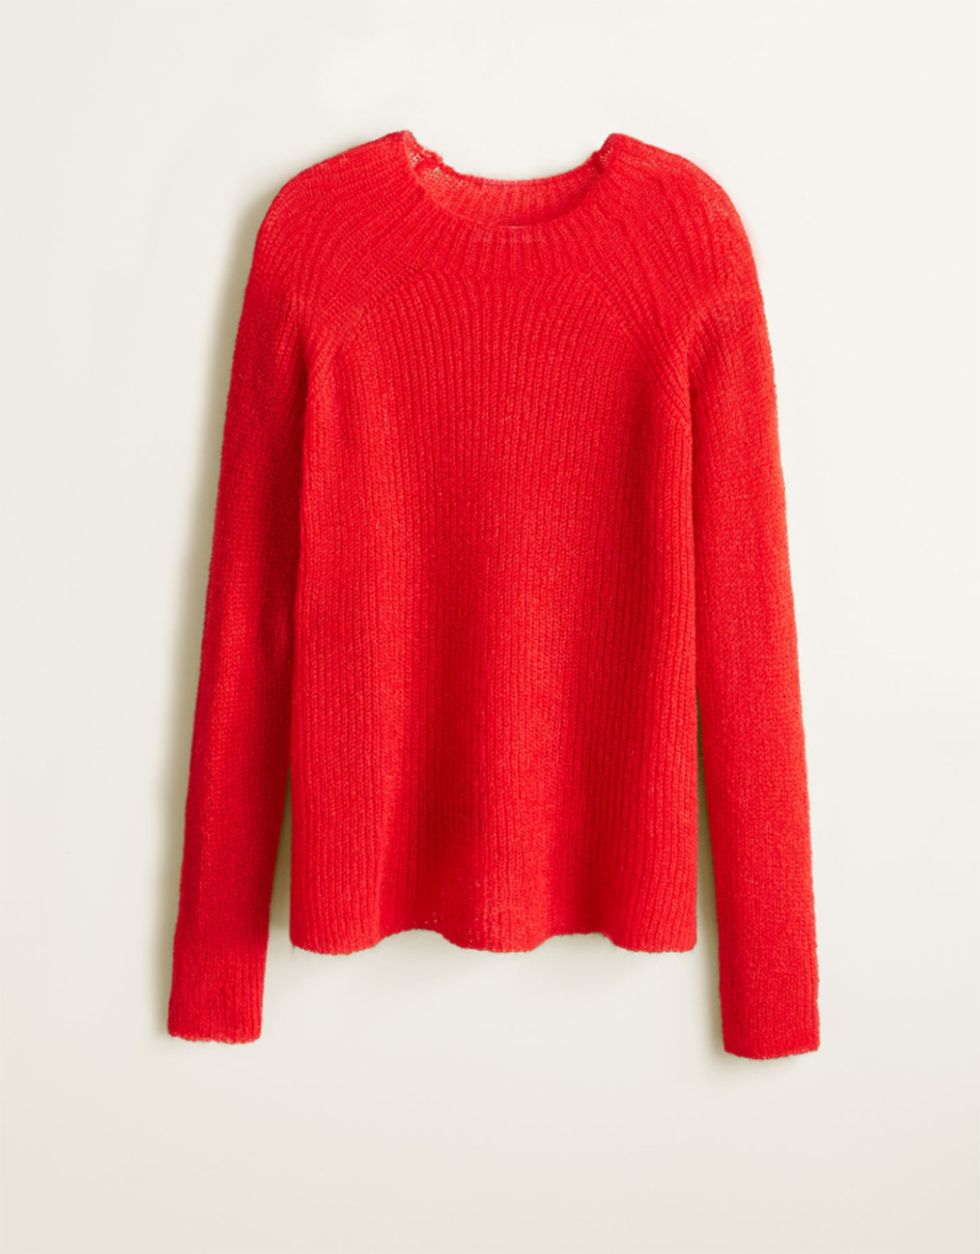 Clothing, Red, Sleeve, Outerwear, Sweater, Neck, Long-sleeved t-shirt, Shoulder, Jersey, Blouse, 